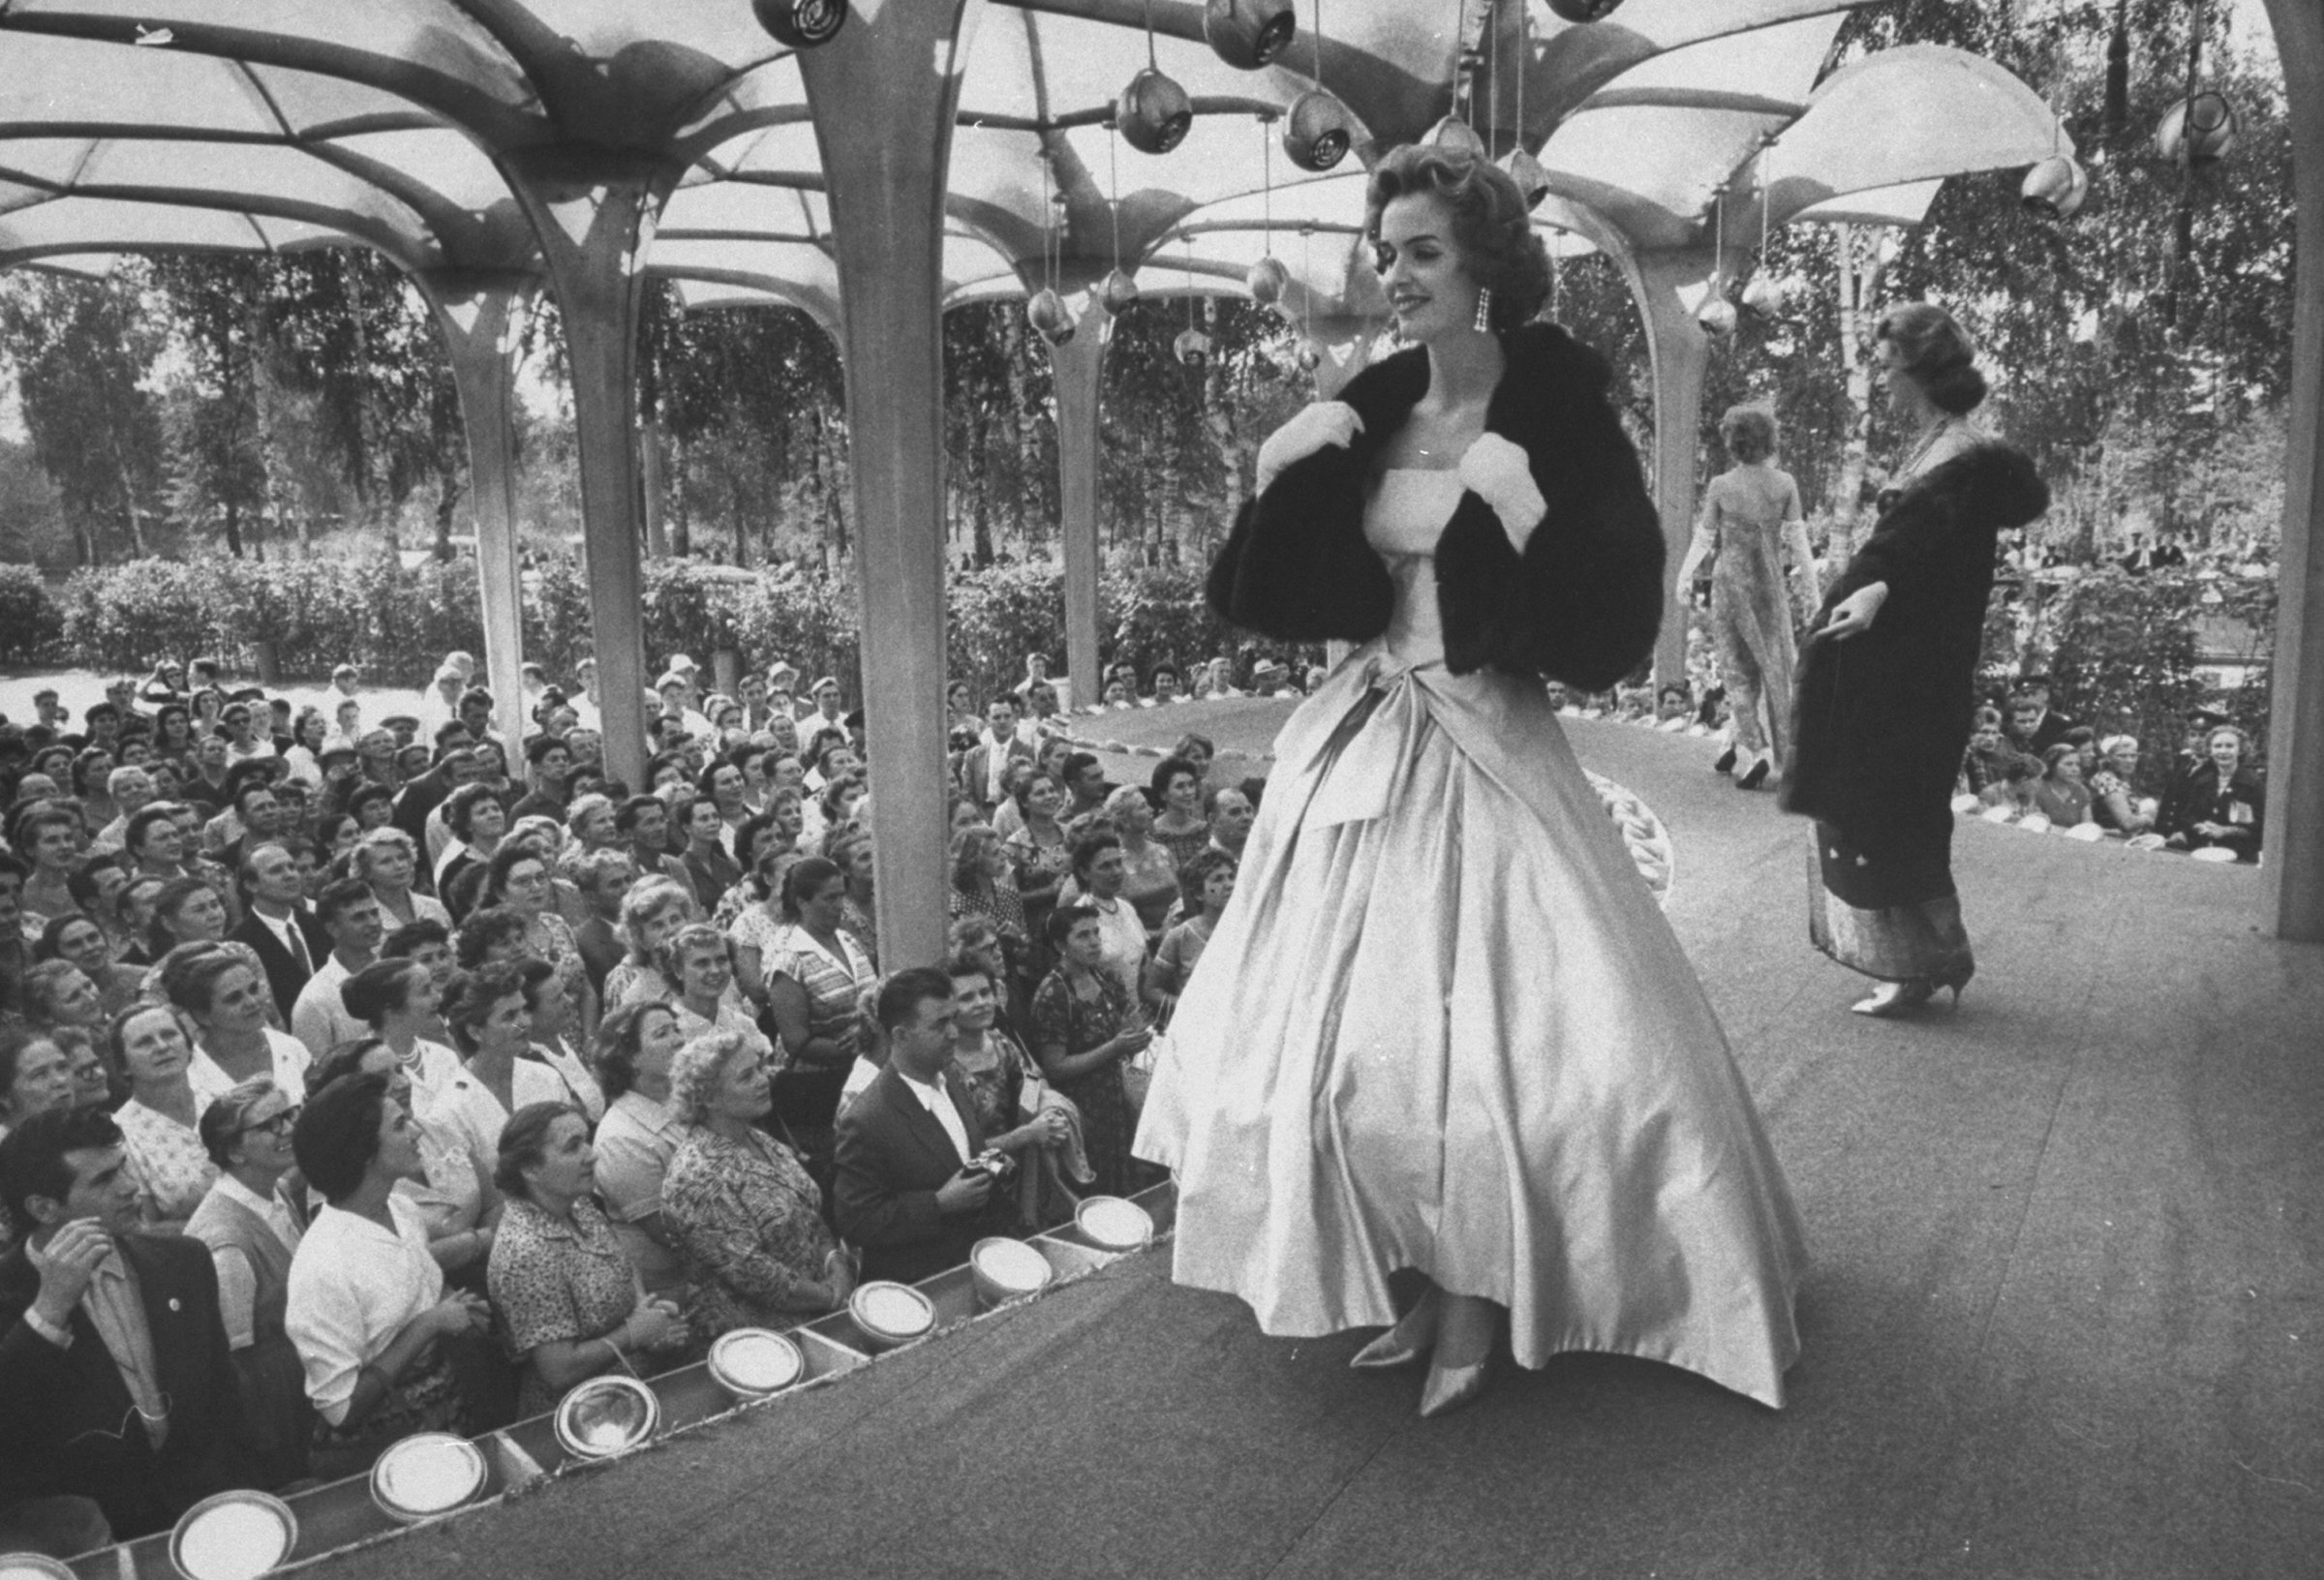 A woman models a gown at a special showing of American fashions in Moscow, 1959